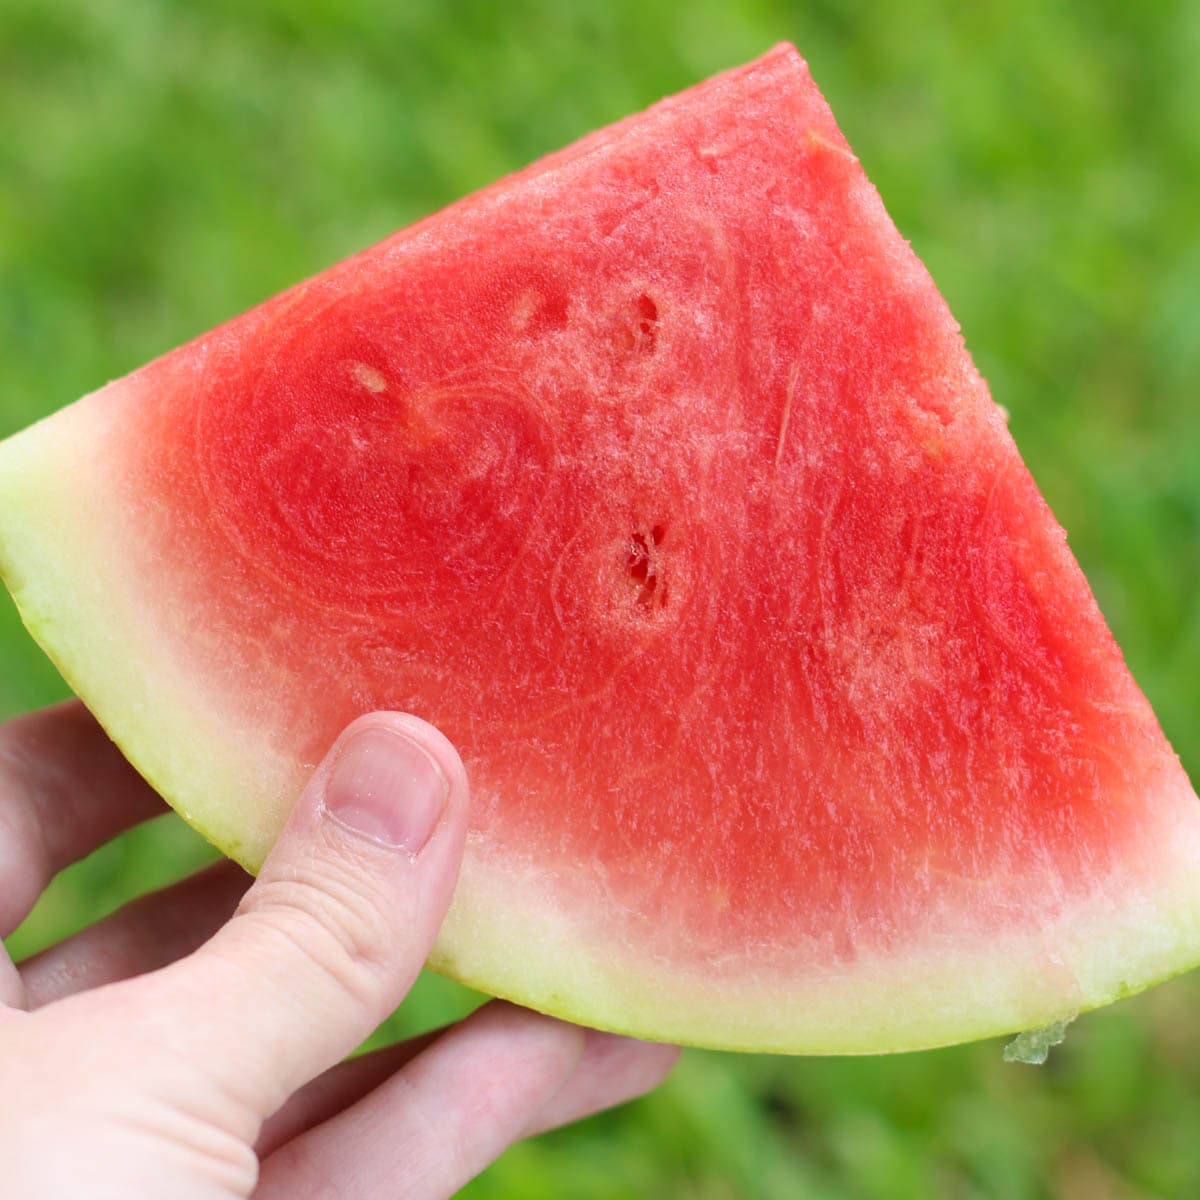 A perfectly picked slice of ripe watermelon.